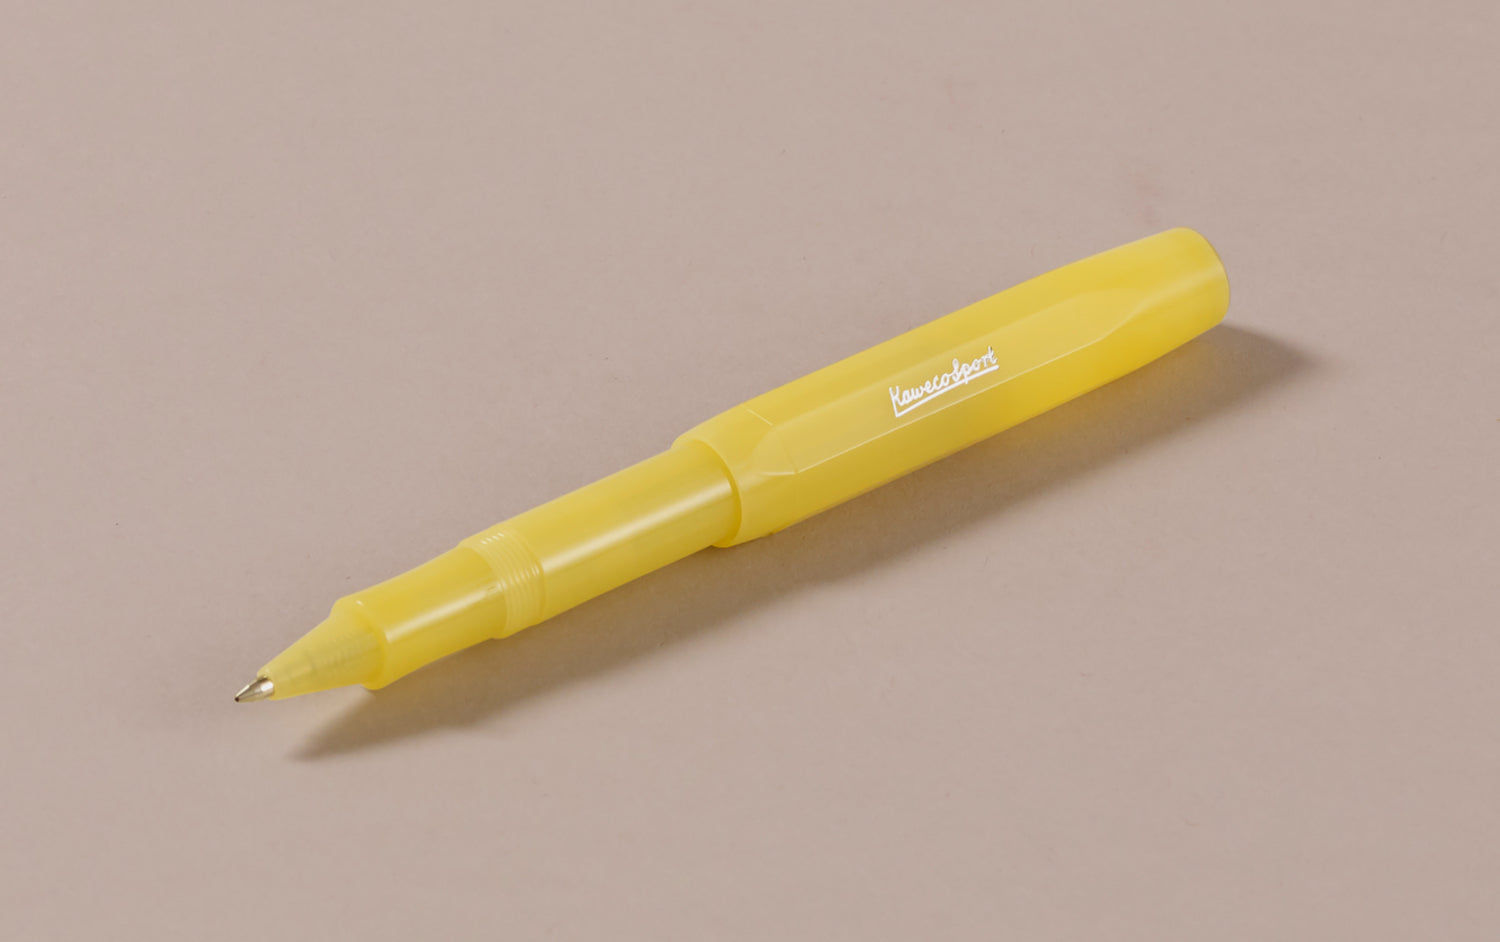 Sweet Banana Kaweco Frosted Sport Rollerball Pen